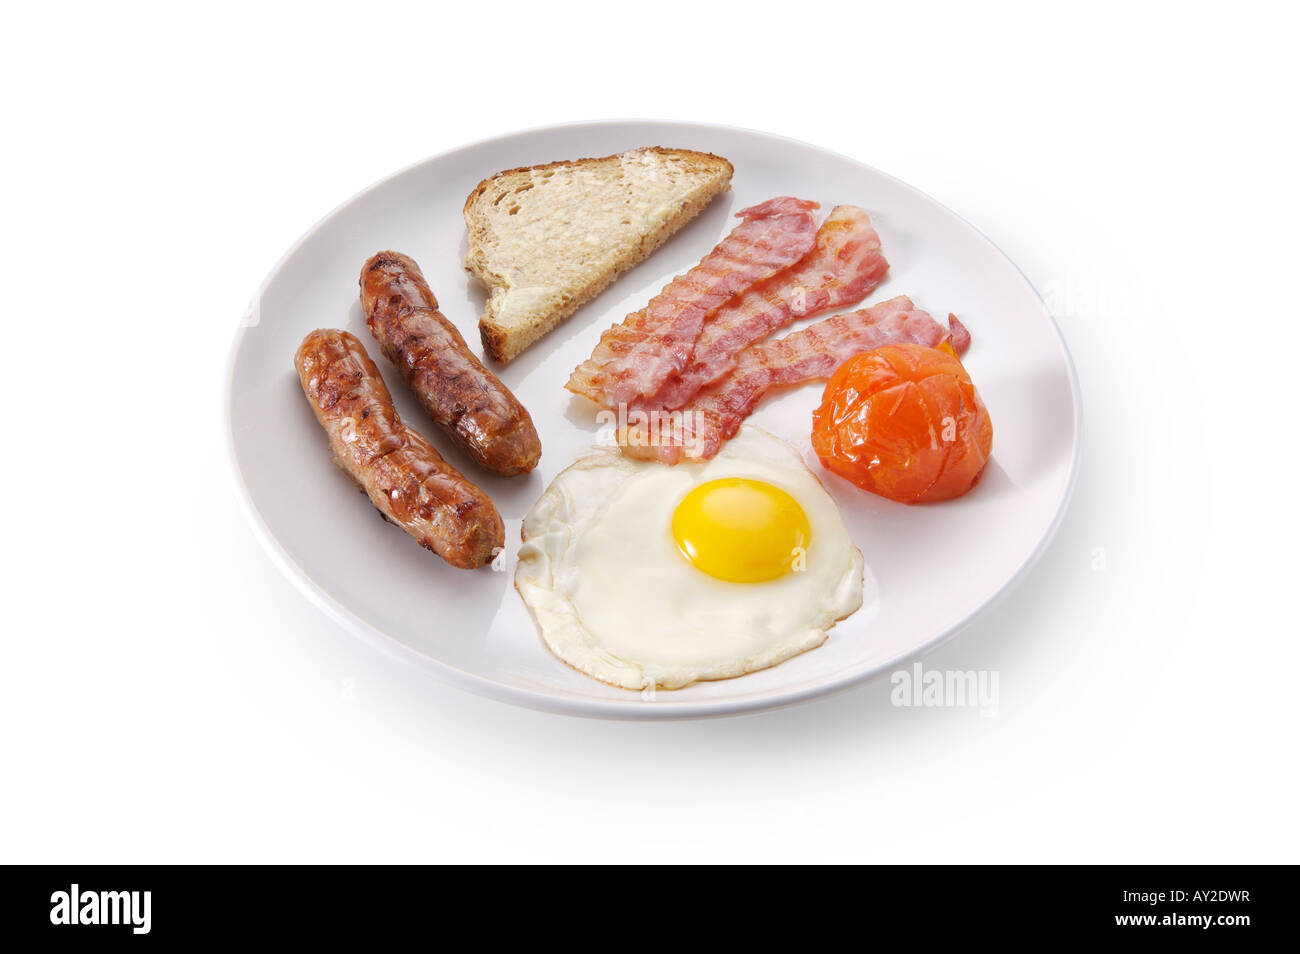 Full english breakfast Cut Out Stock Images & Pictures - Alamy